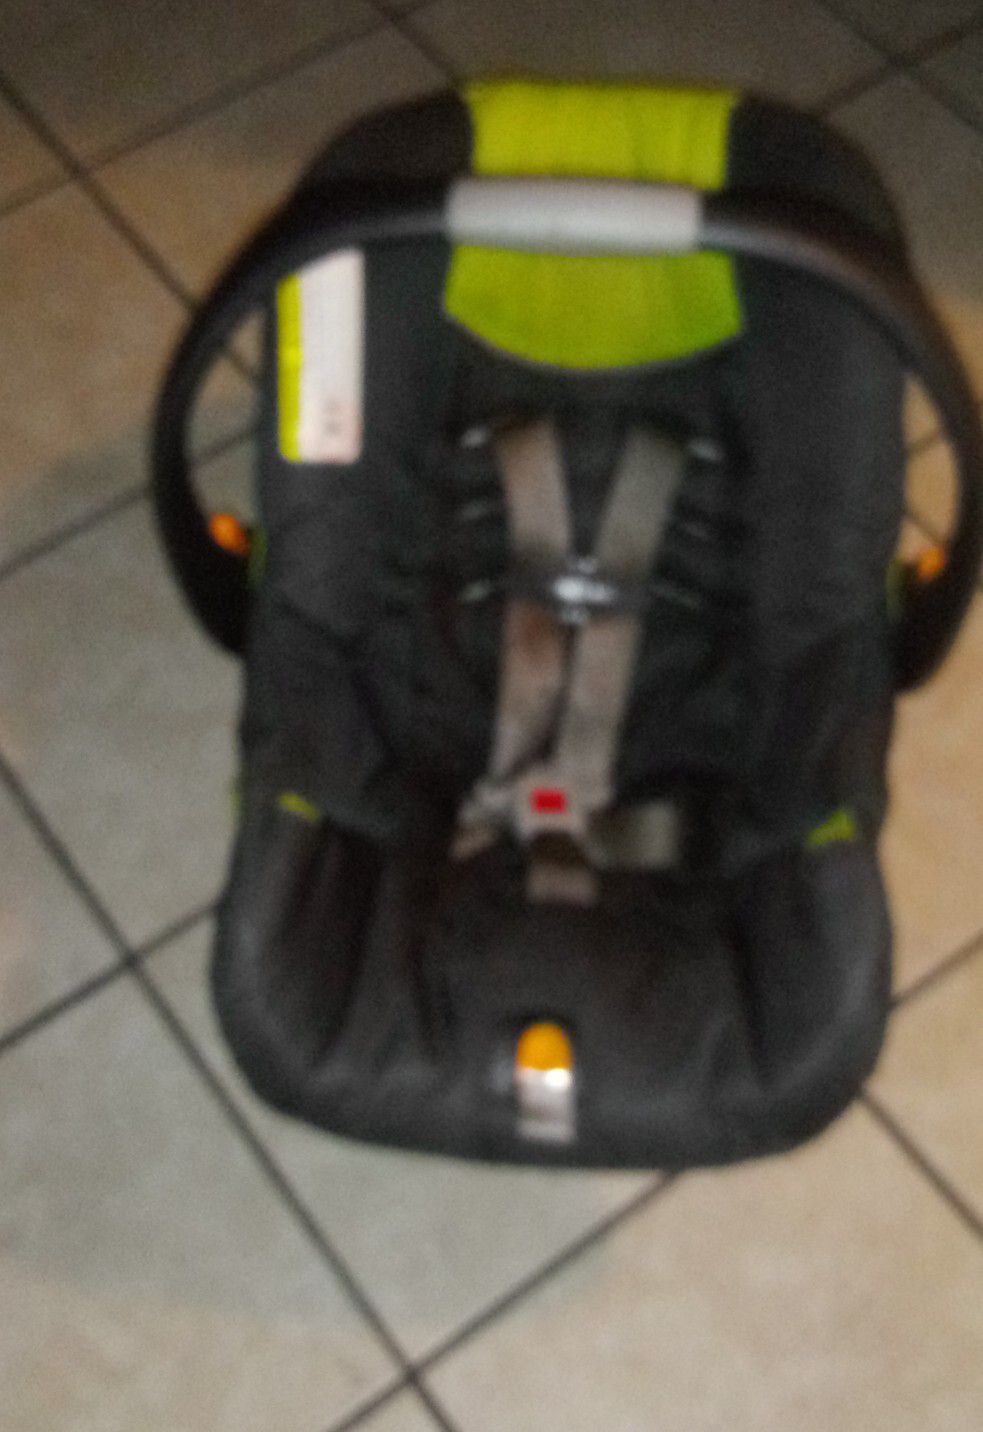 Chicco Brand Car Seat